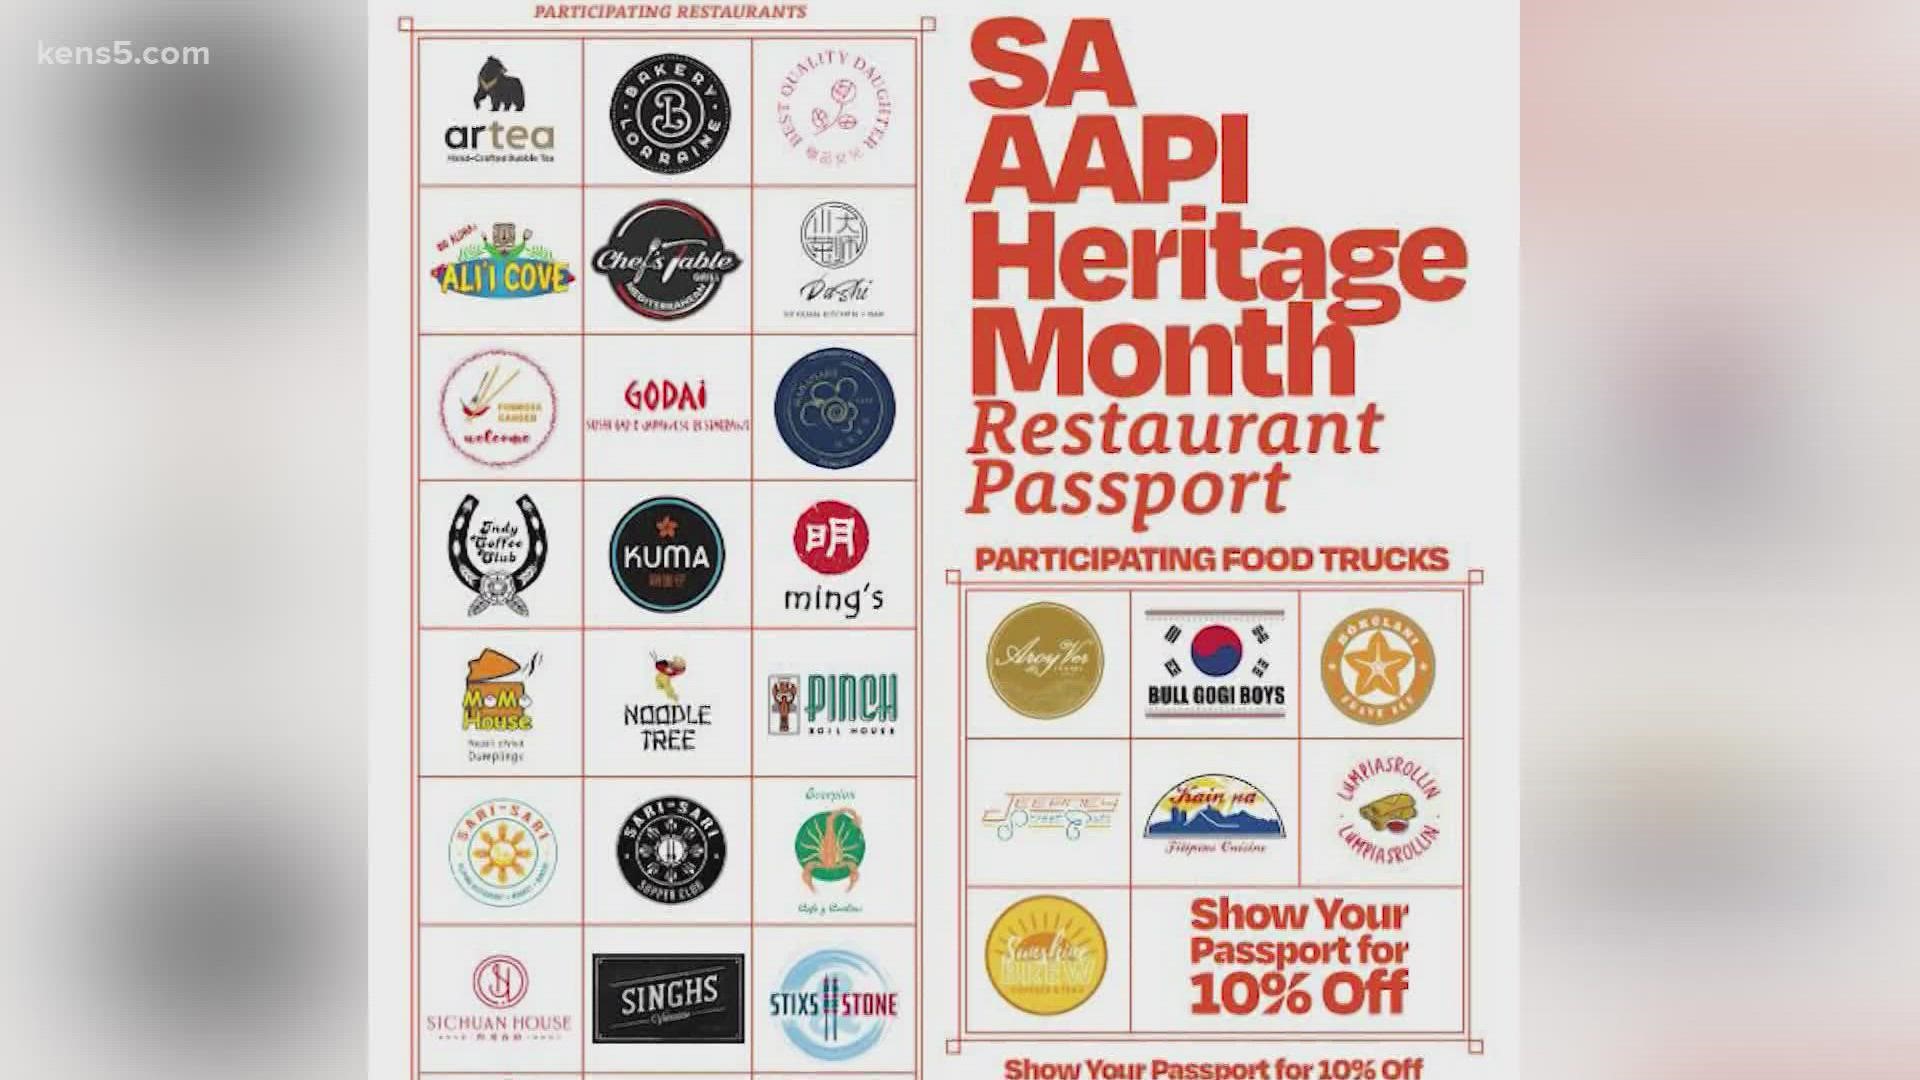 The free downloadable passport gets you 10% off at participating locations in honor of Asian-American and Pacific Islander Heritage month.